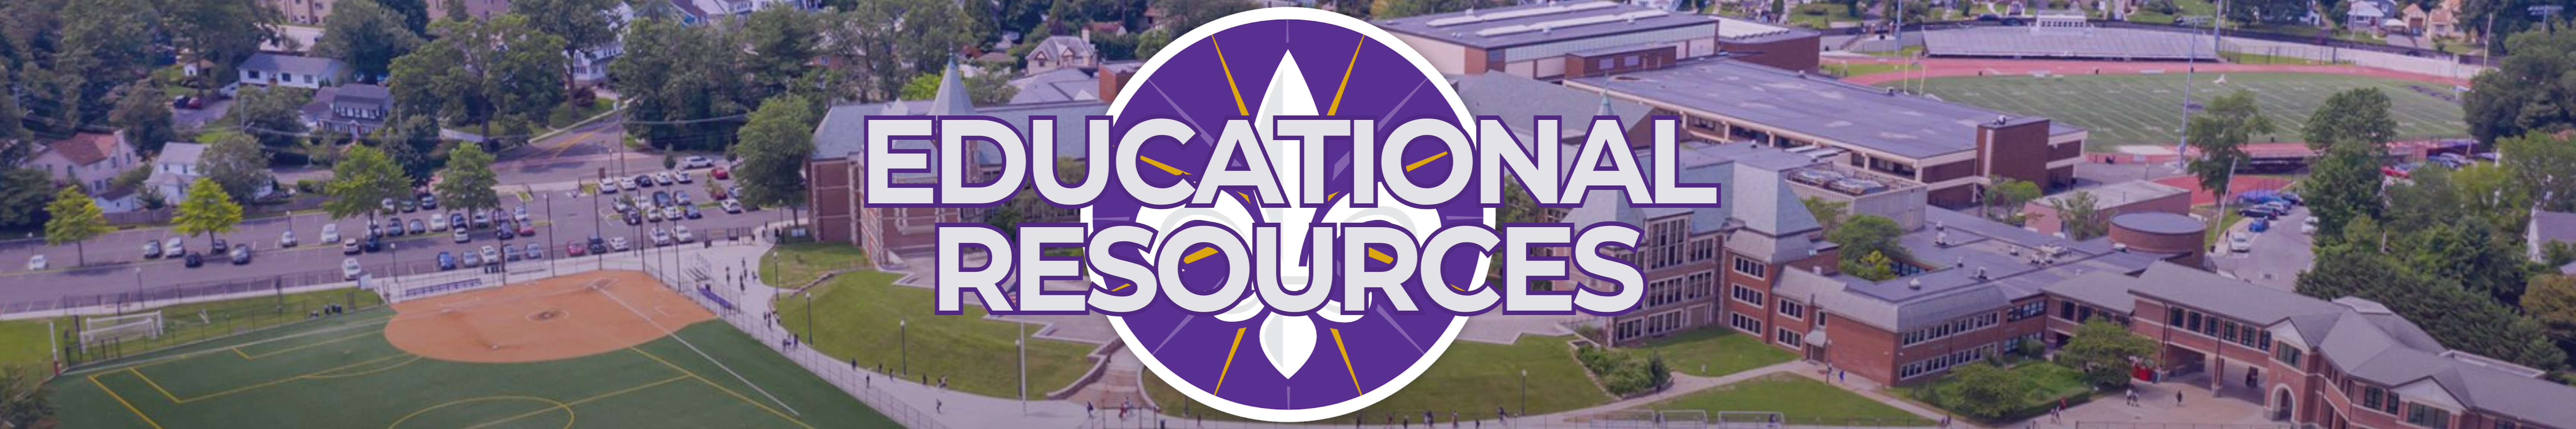 educational resources banner